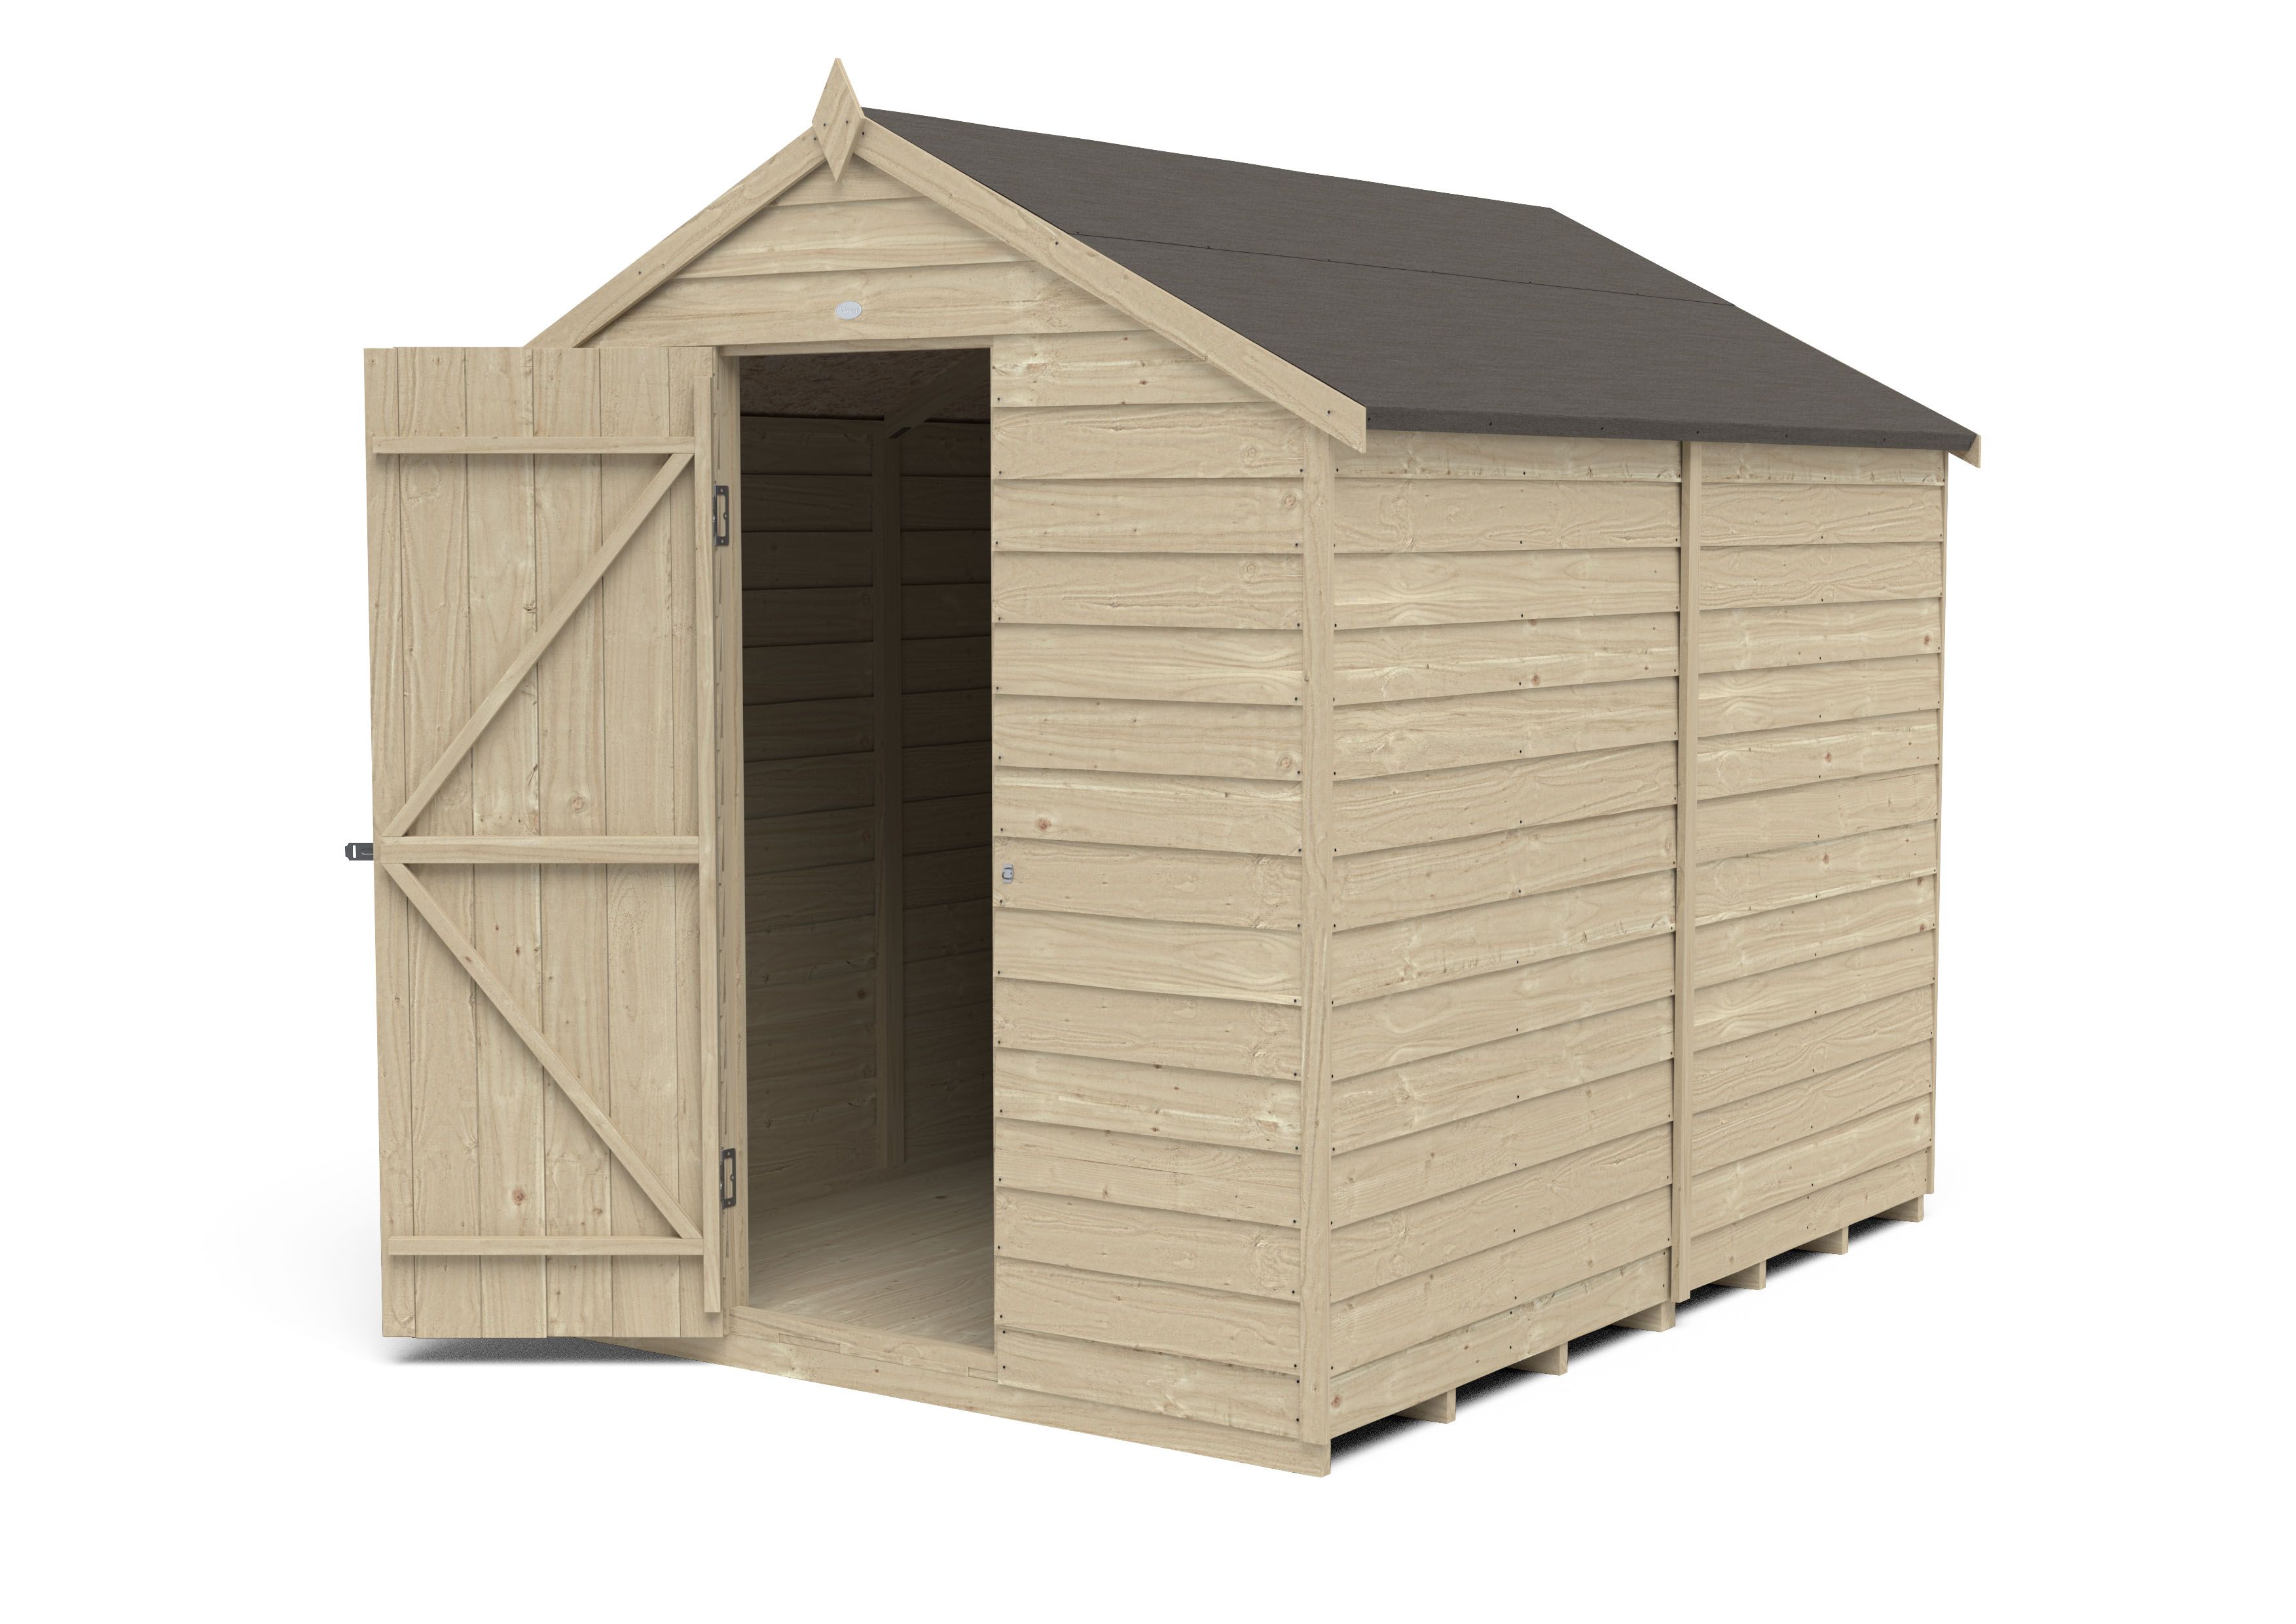 Forest Garden Overlap 8x6 ft Apex Wooden Pressure treated Shed with floor